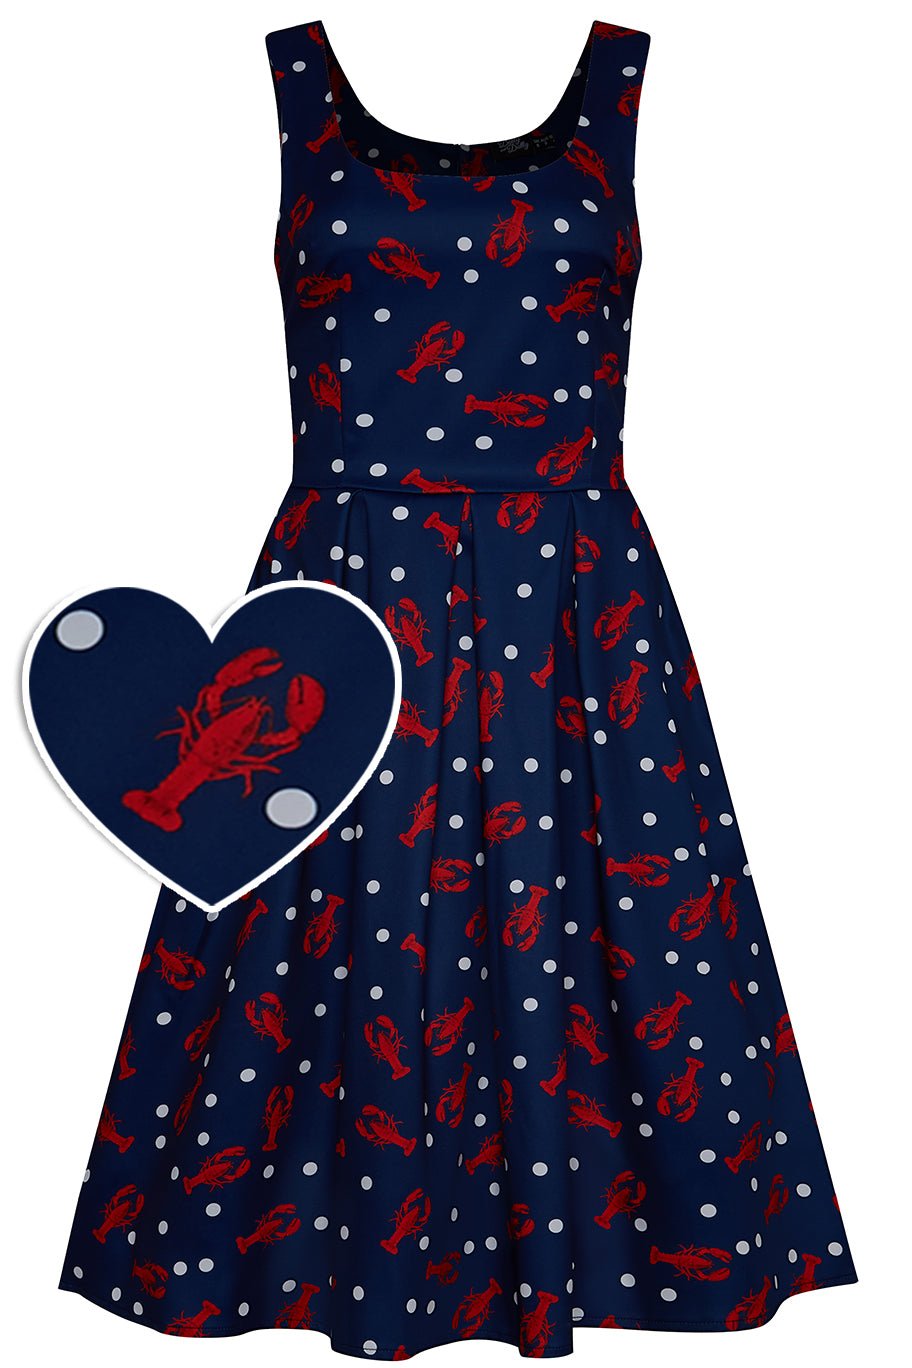 50s Inspired Navy Swing Dress with Red Lobsters and White Dots